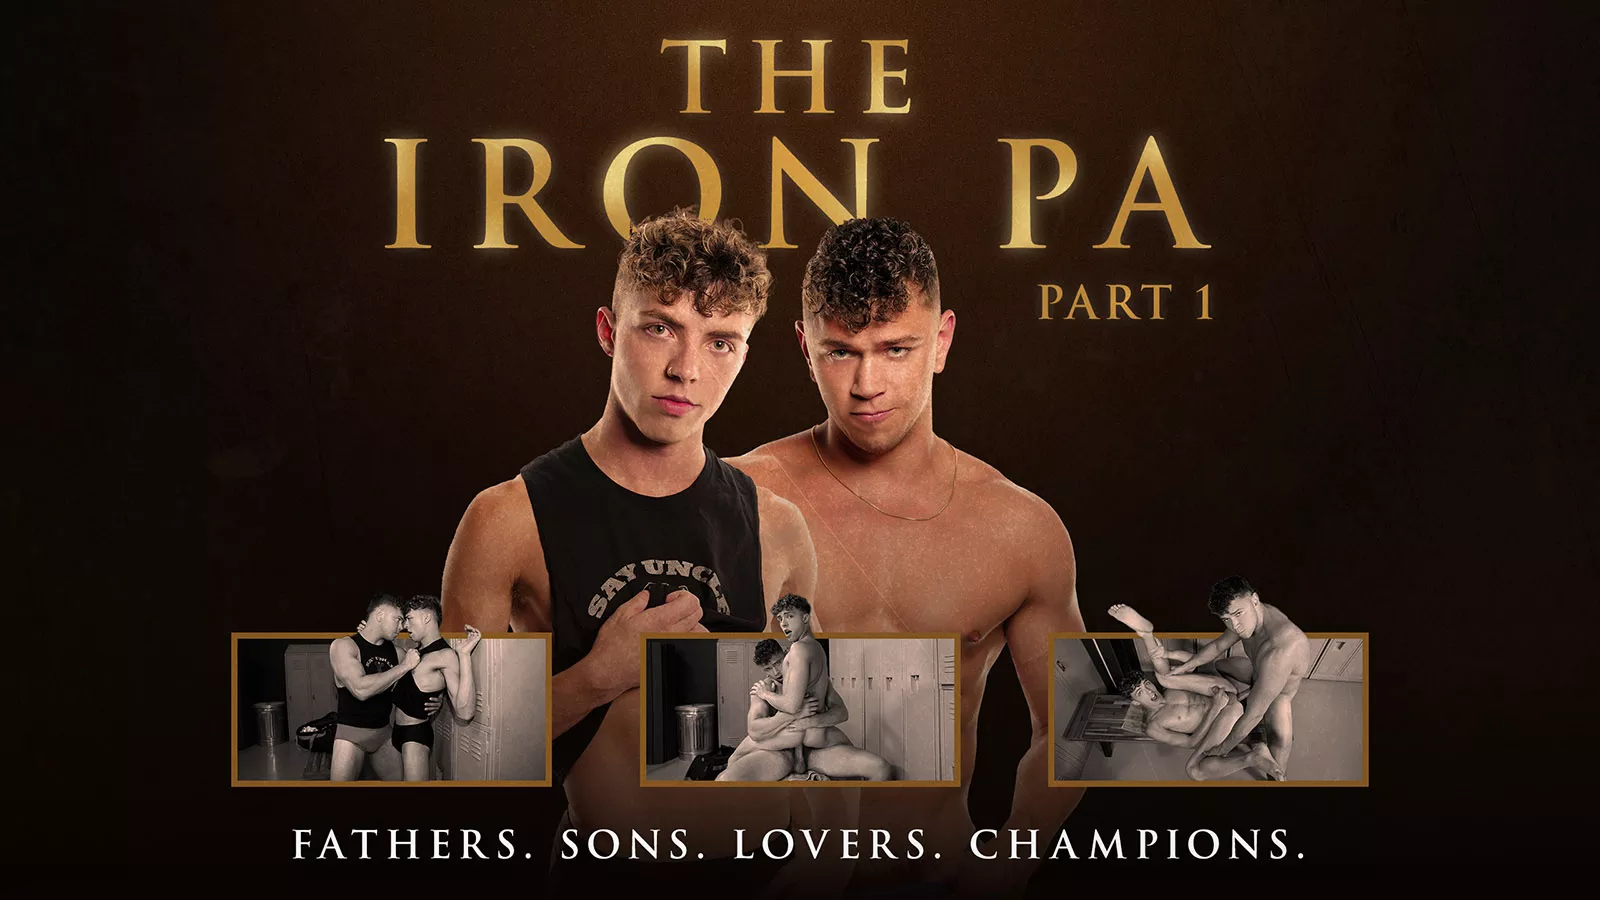 The Iron Pa Part 1, Our Secret Love – Jack Valor and Tanner Valentino